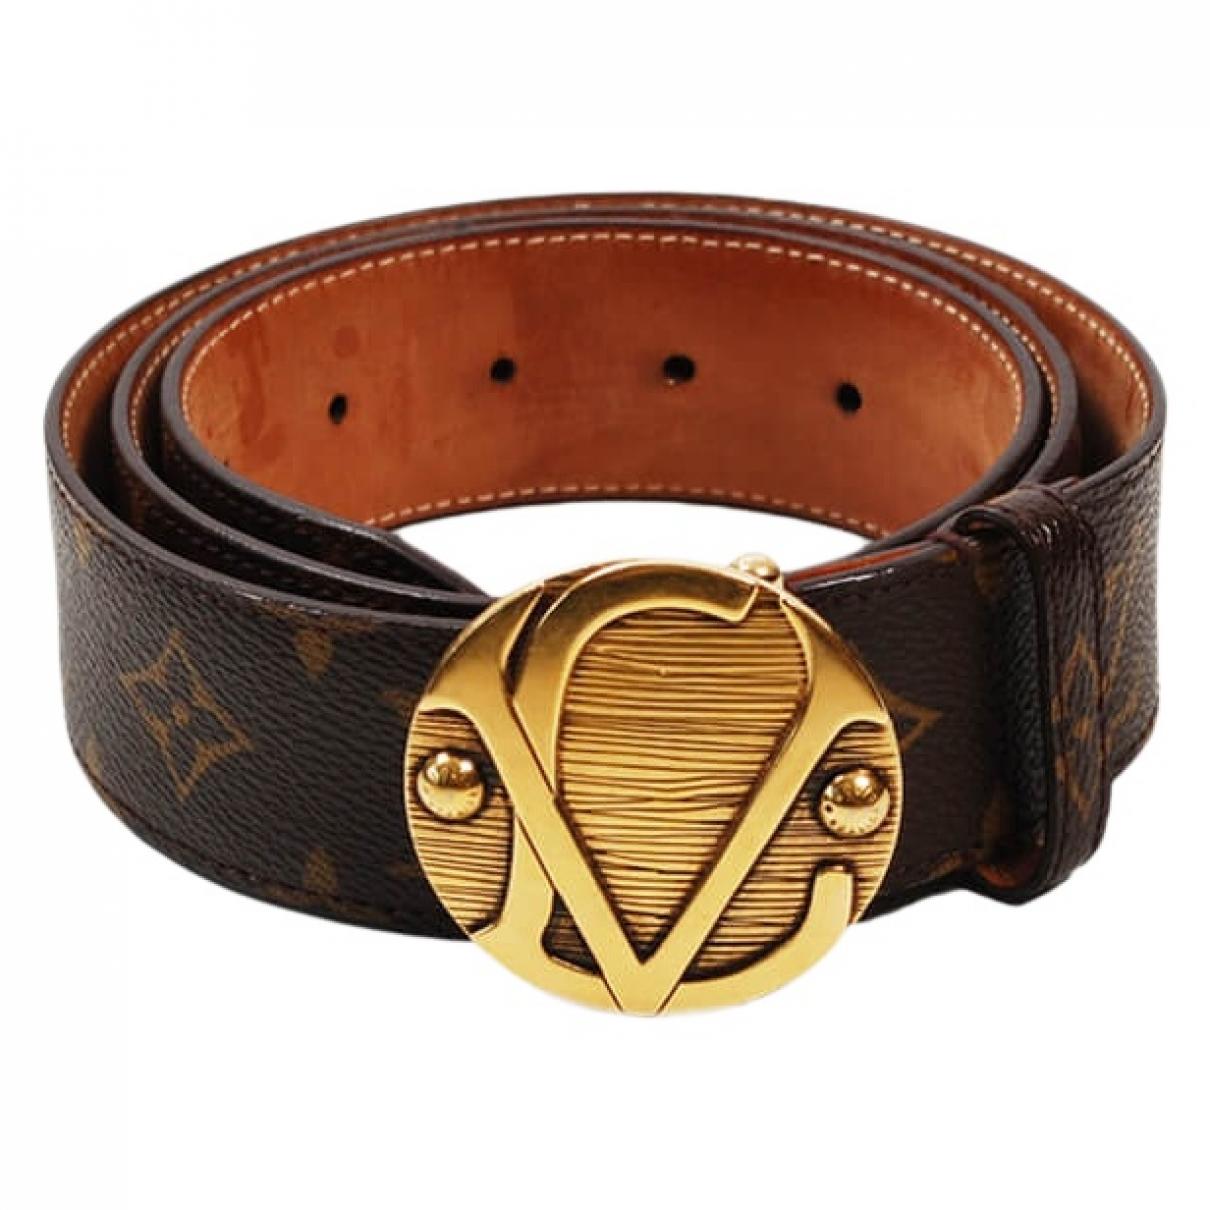 Louis Vuitton Leather Belt in Brown for Men - Lyst